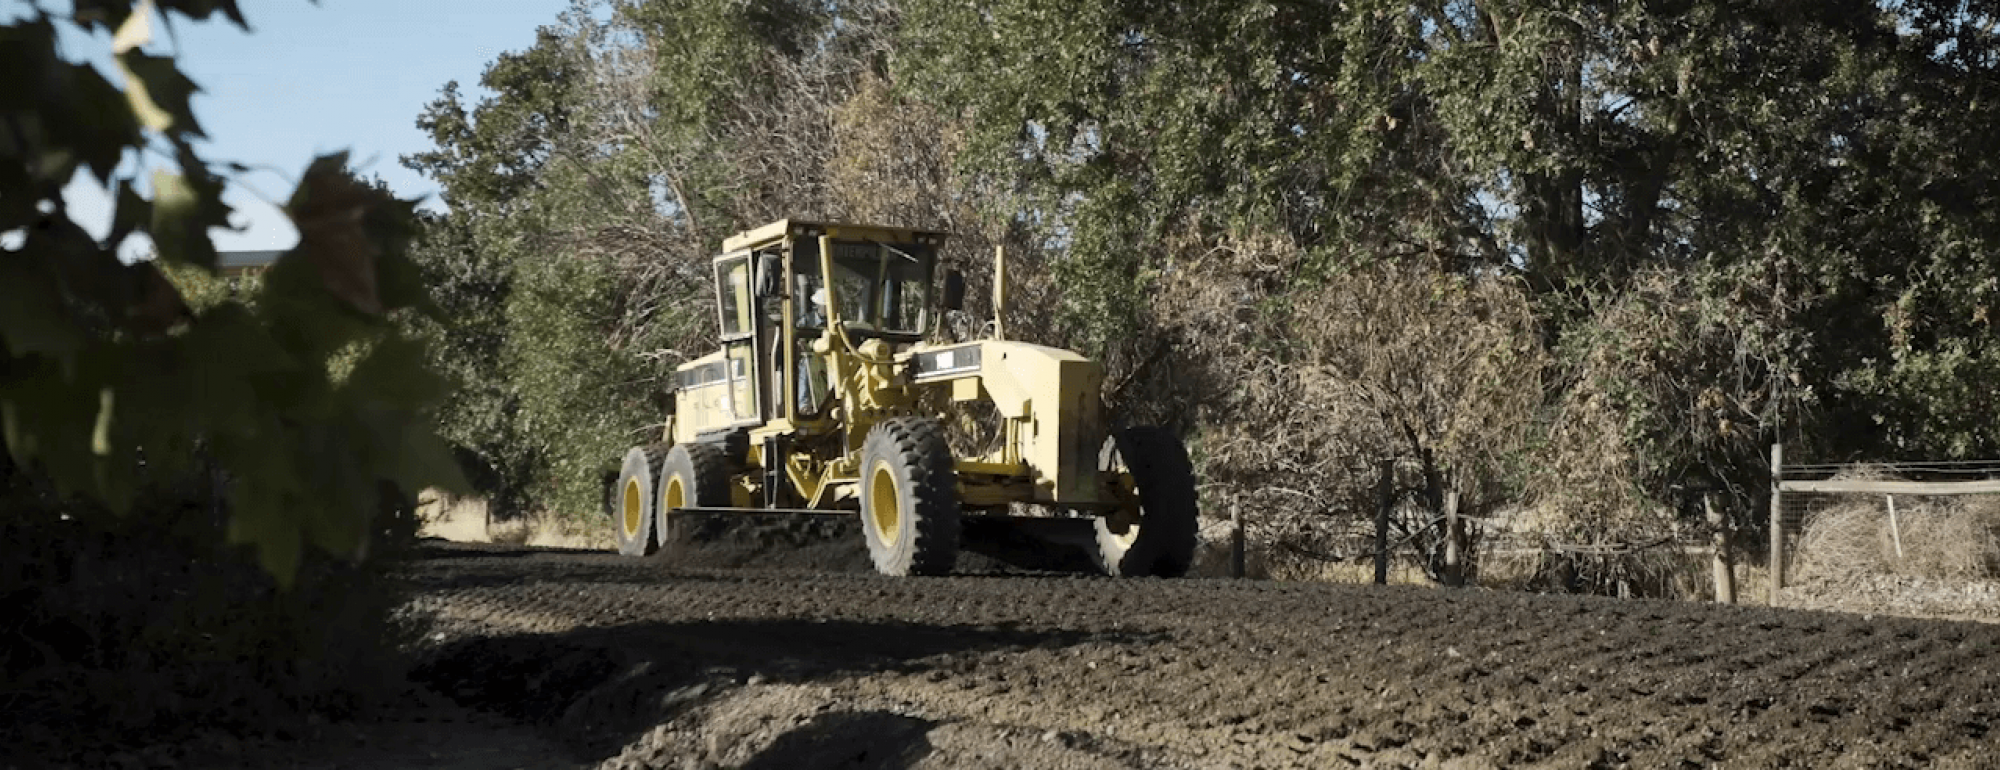 researchers prepare to pave dirt road